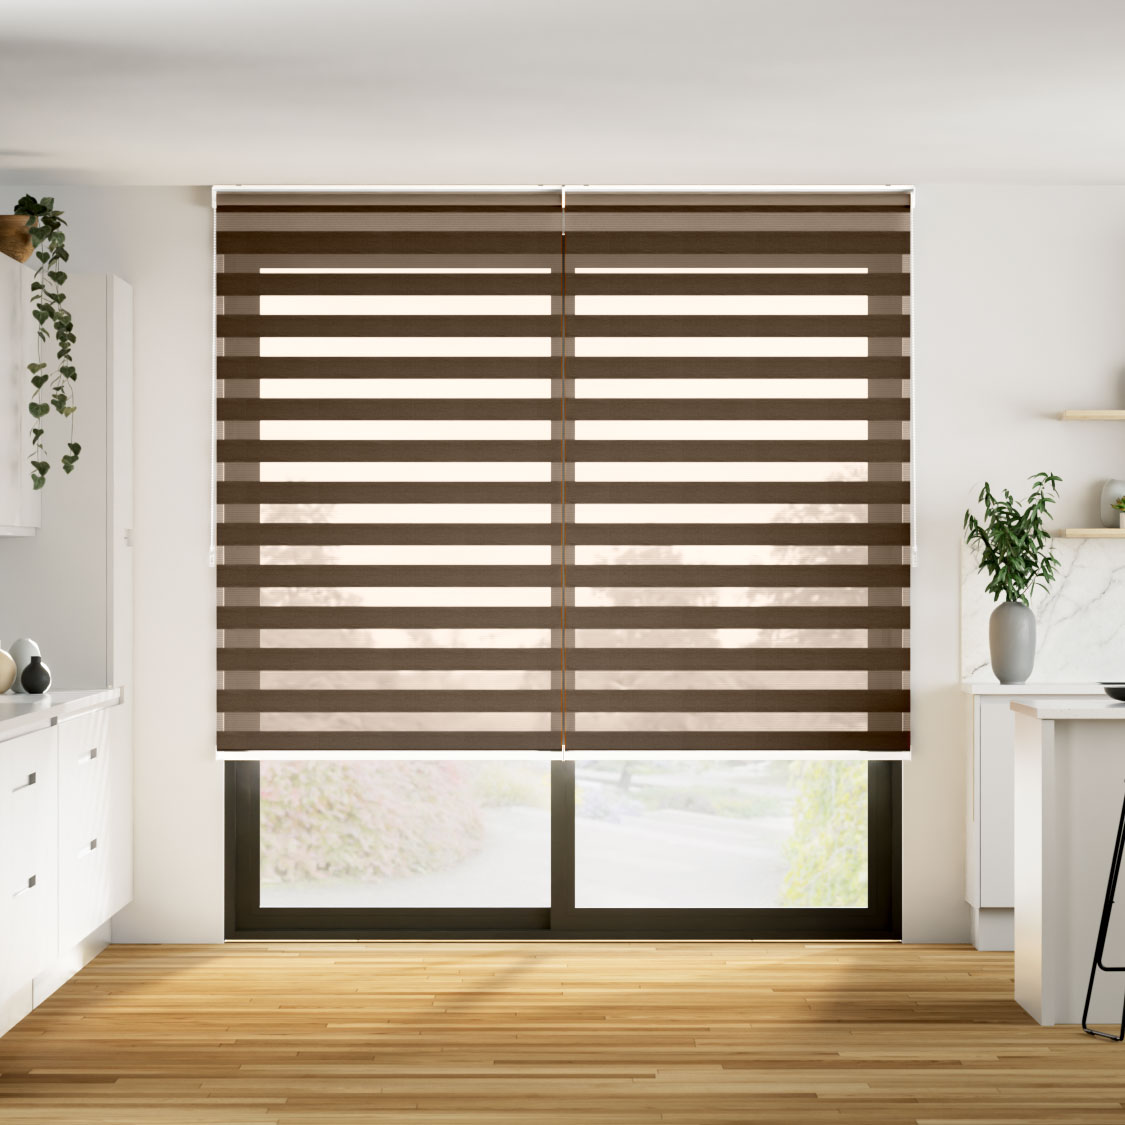 Night & Day Roller Blinds Mod. Corti